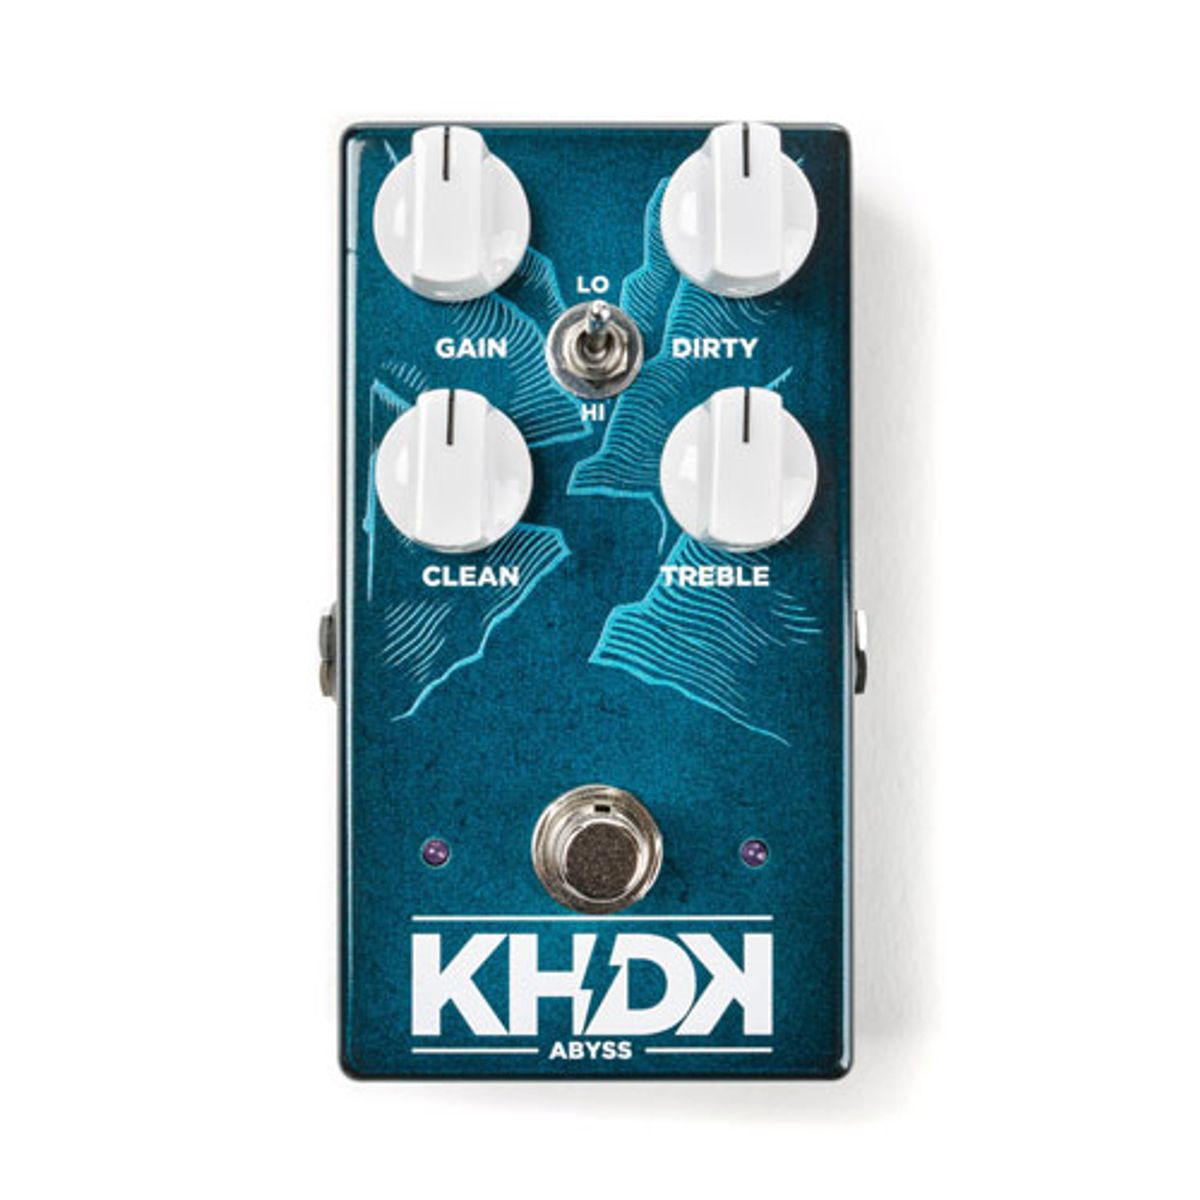 KHDK Electronics Introduces the Abyss Bass Overdrive